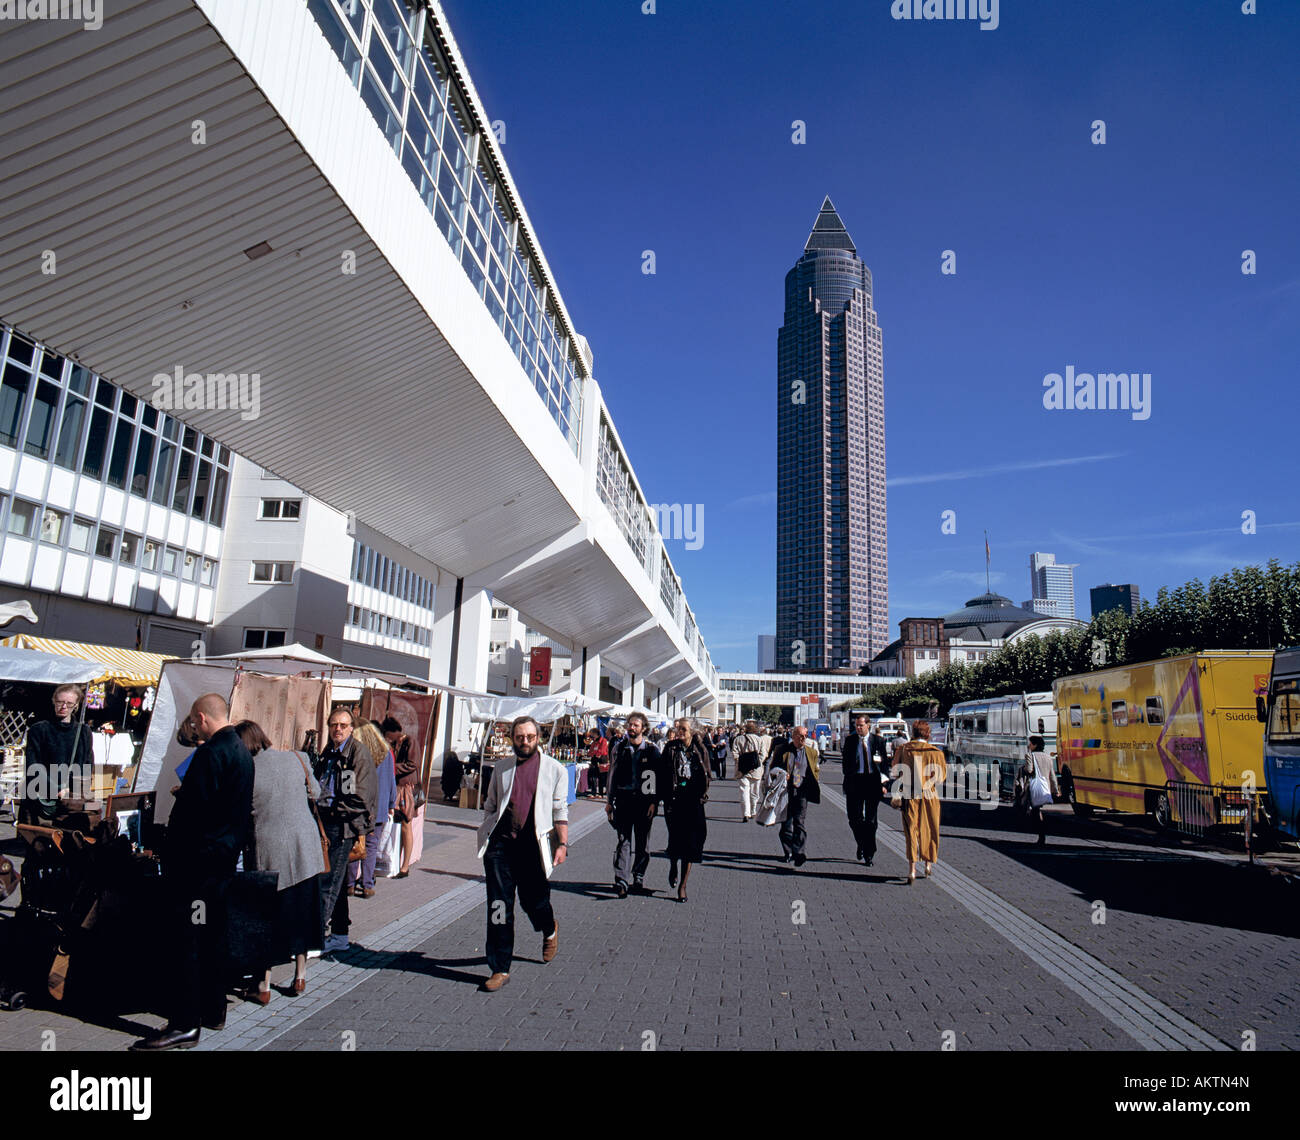 D-Frankfurt on the Main, Hesse, trade, fair, exhibition site during the Frankfurt Book Fair, Fair Tower, skyscraper, people, visitors to the fair Stock Photo